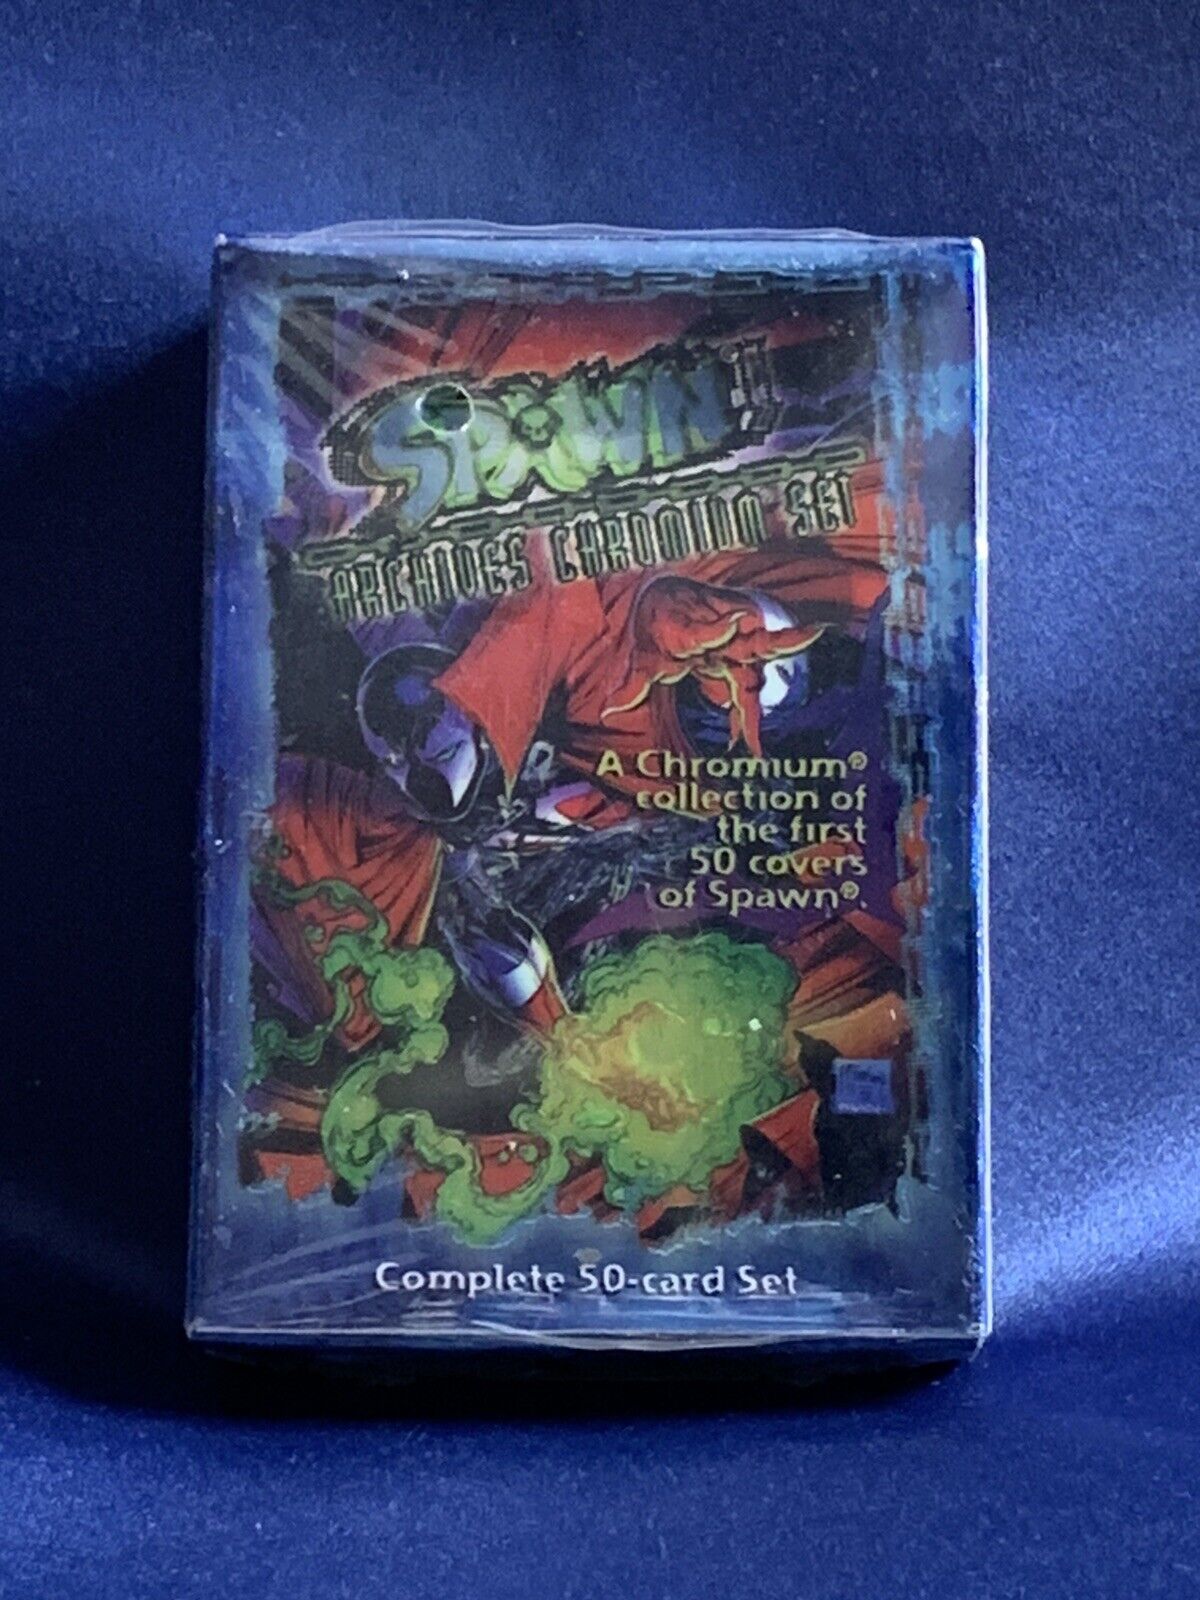 SPAWN Archives Chromium card set Sealed The first 50 covers of Spawn Xtra RARE